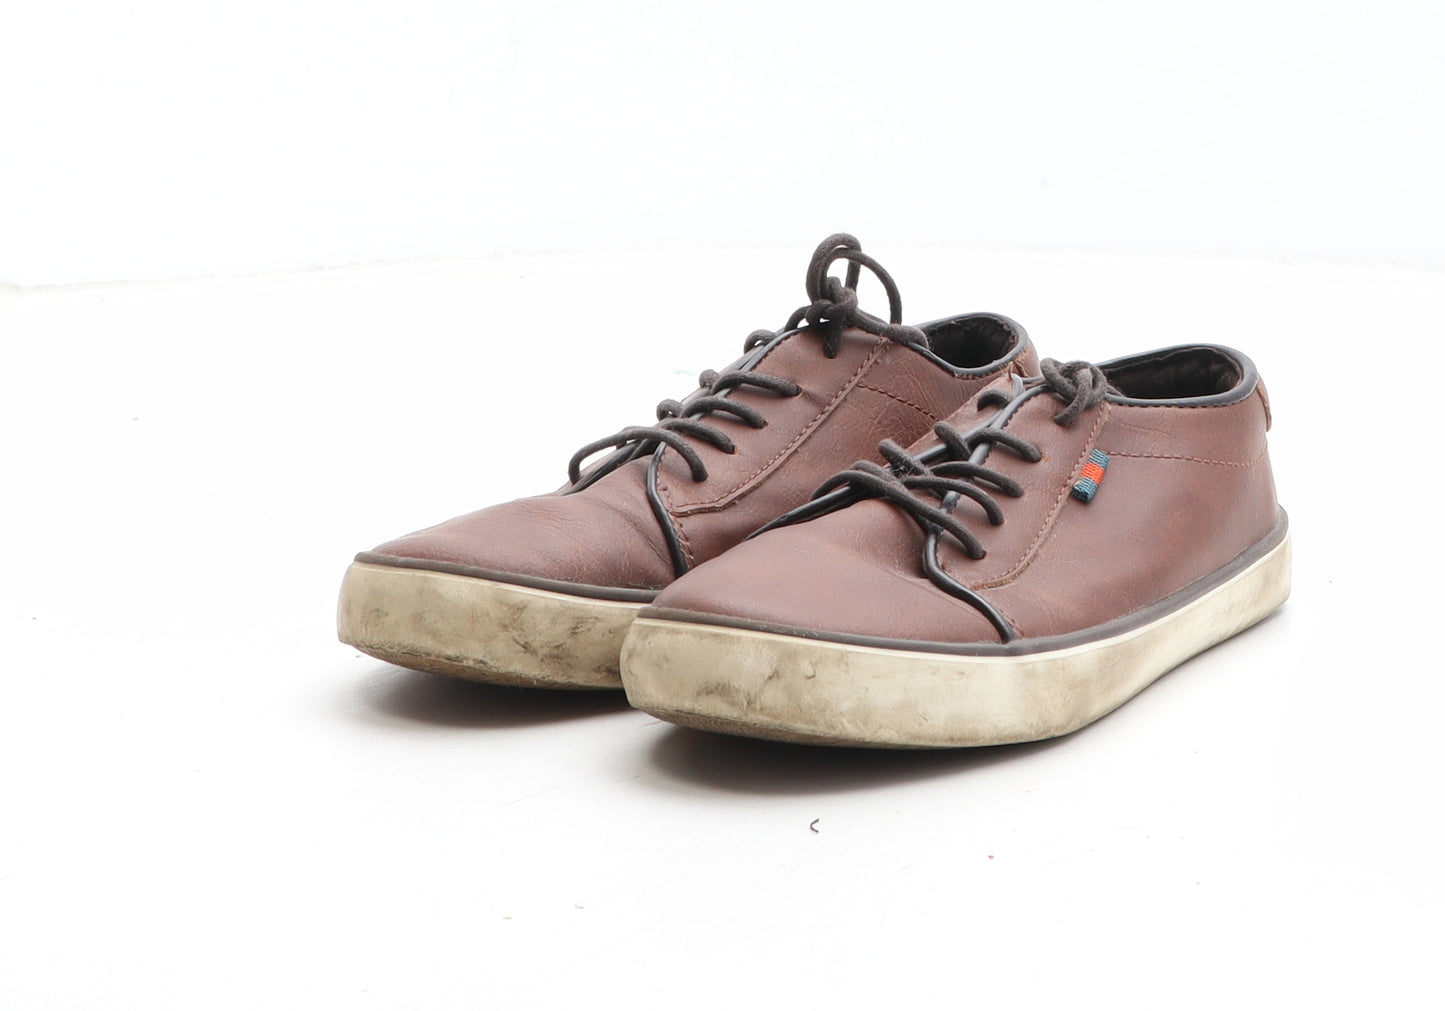 NEXT Boys Brown Synthetic Trainer Casual UK 12